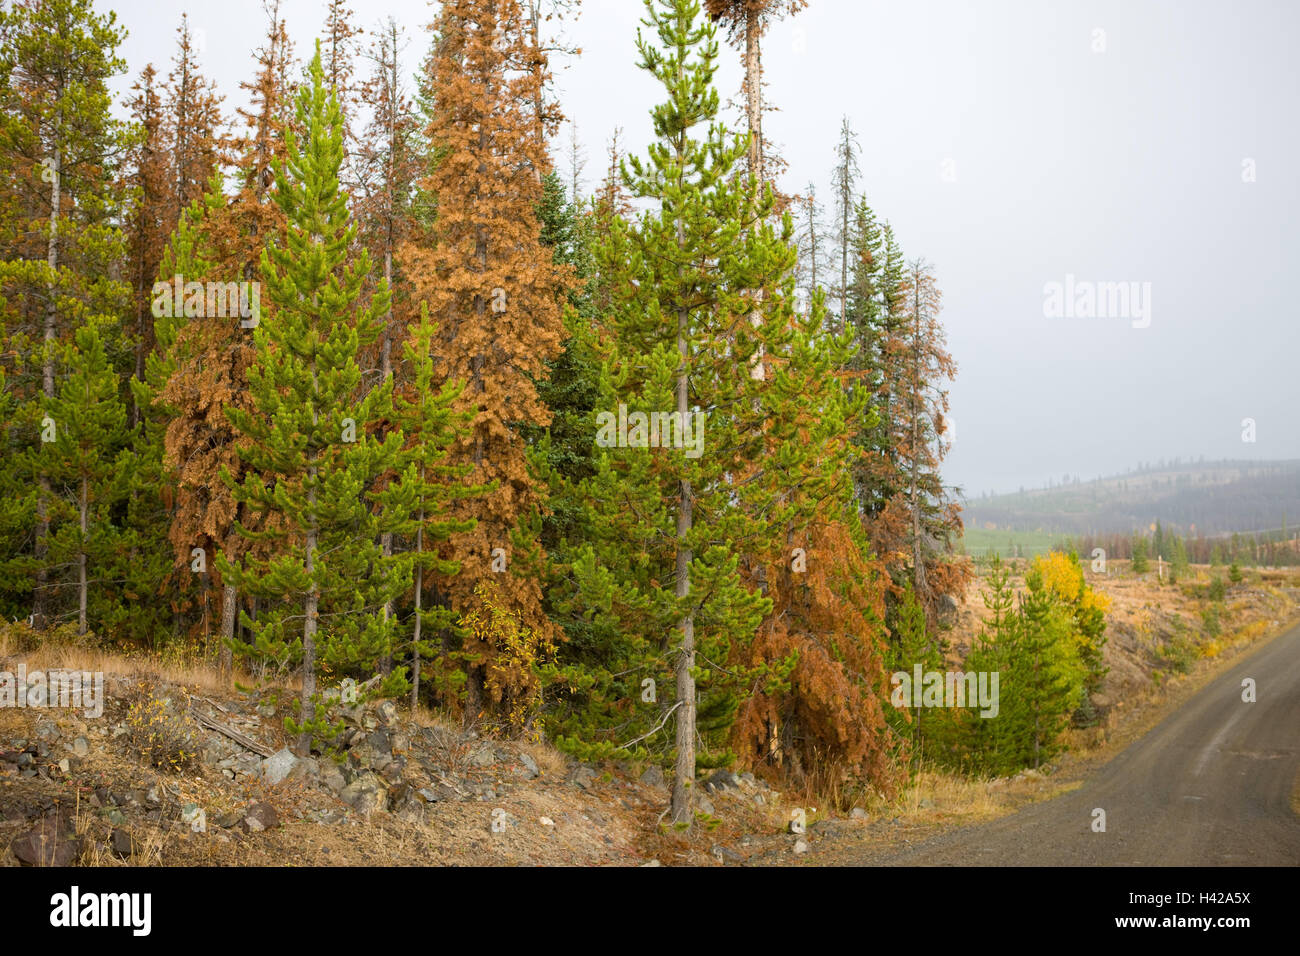 Country road, wood, forest deaths, bark beetle infestation, scenery, coniferous forest, trees, conifers, traffic route, street, roadside, bark beetle, damages, impairment, Mountain-Pine-Beatle, forest pests, die, pine death, forest death, bark beetle infestation, nobody, Stock Photo